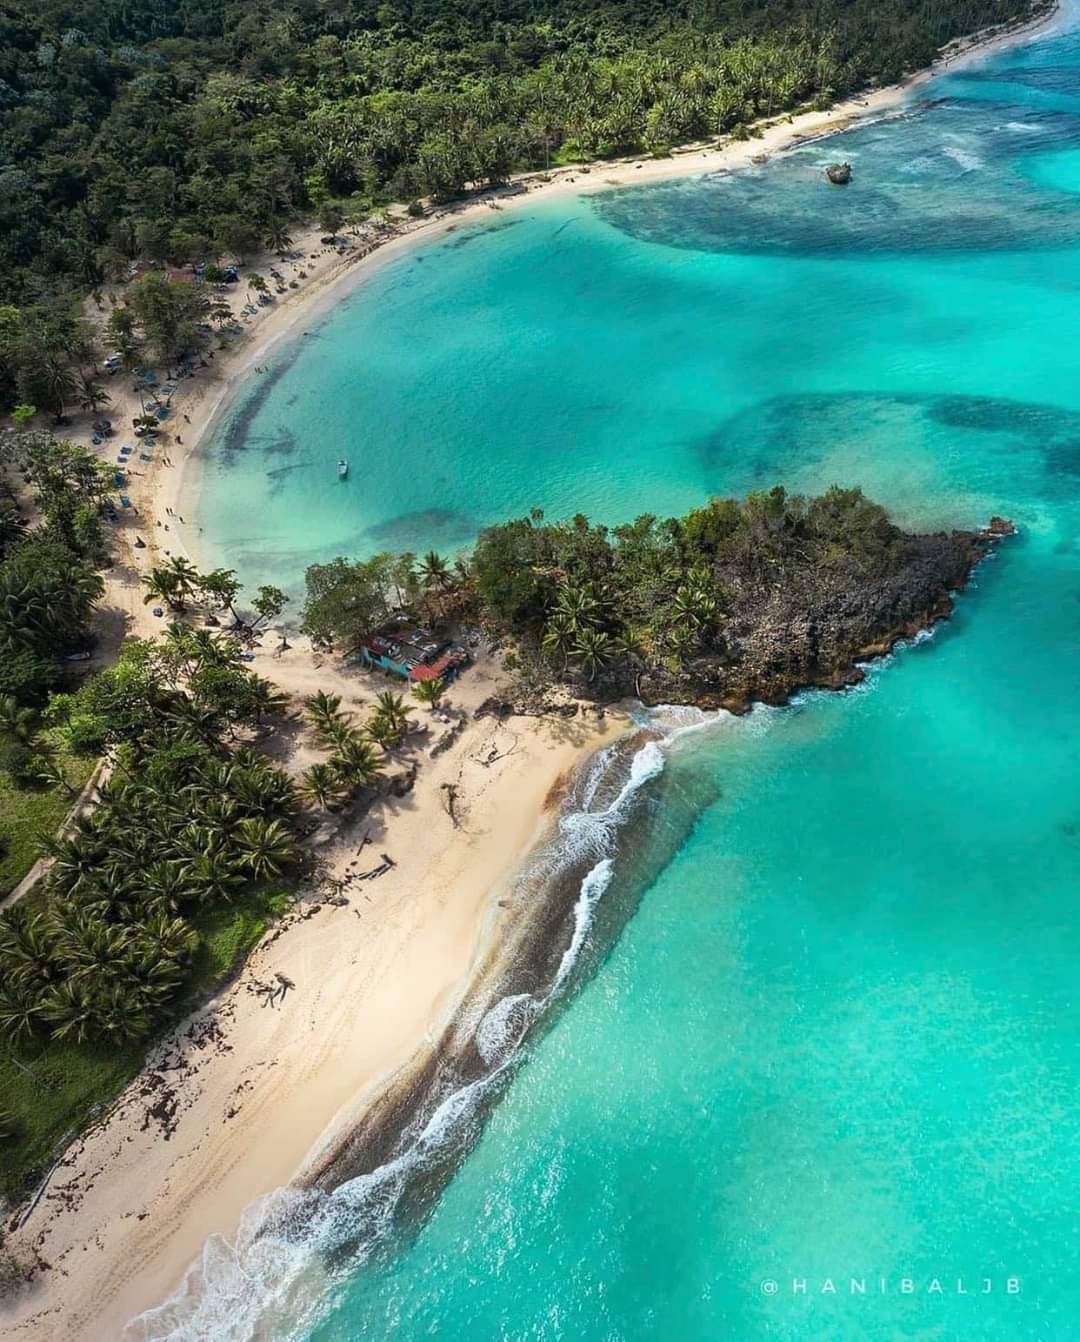 Jamaica vs the Dominican Republic — Which is Better for Vacation?